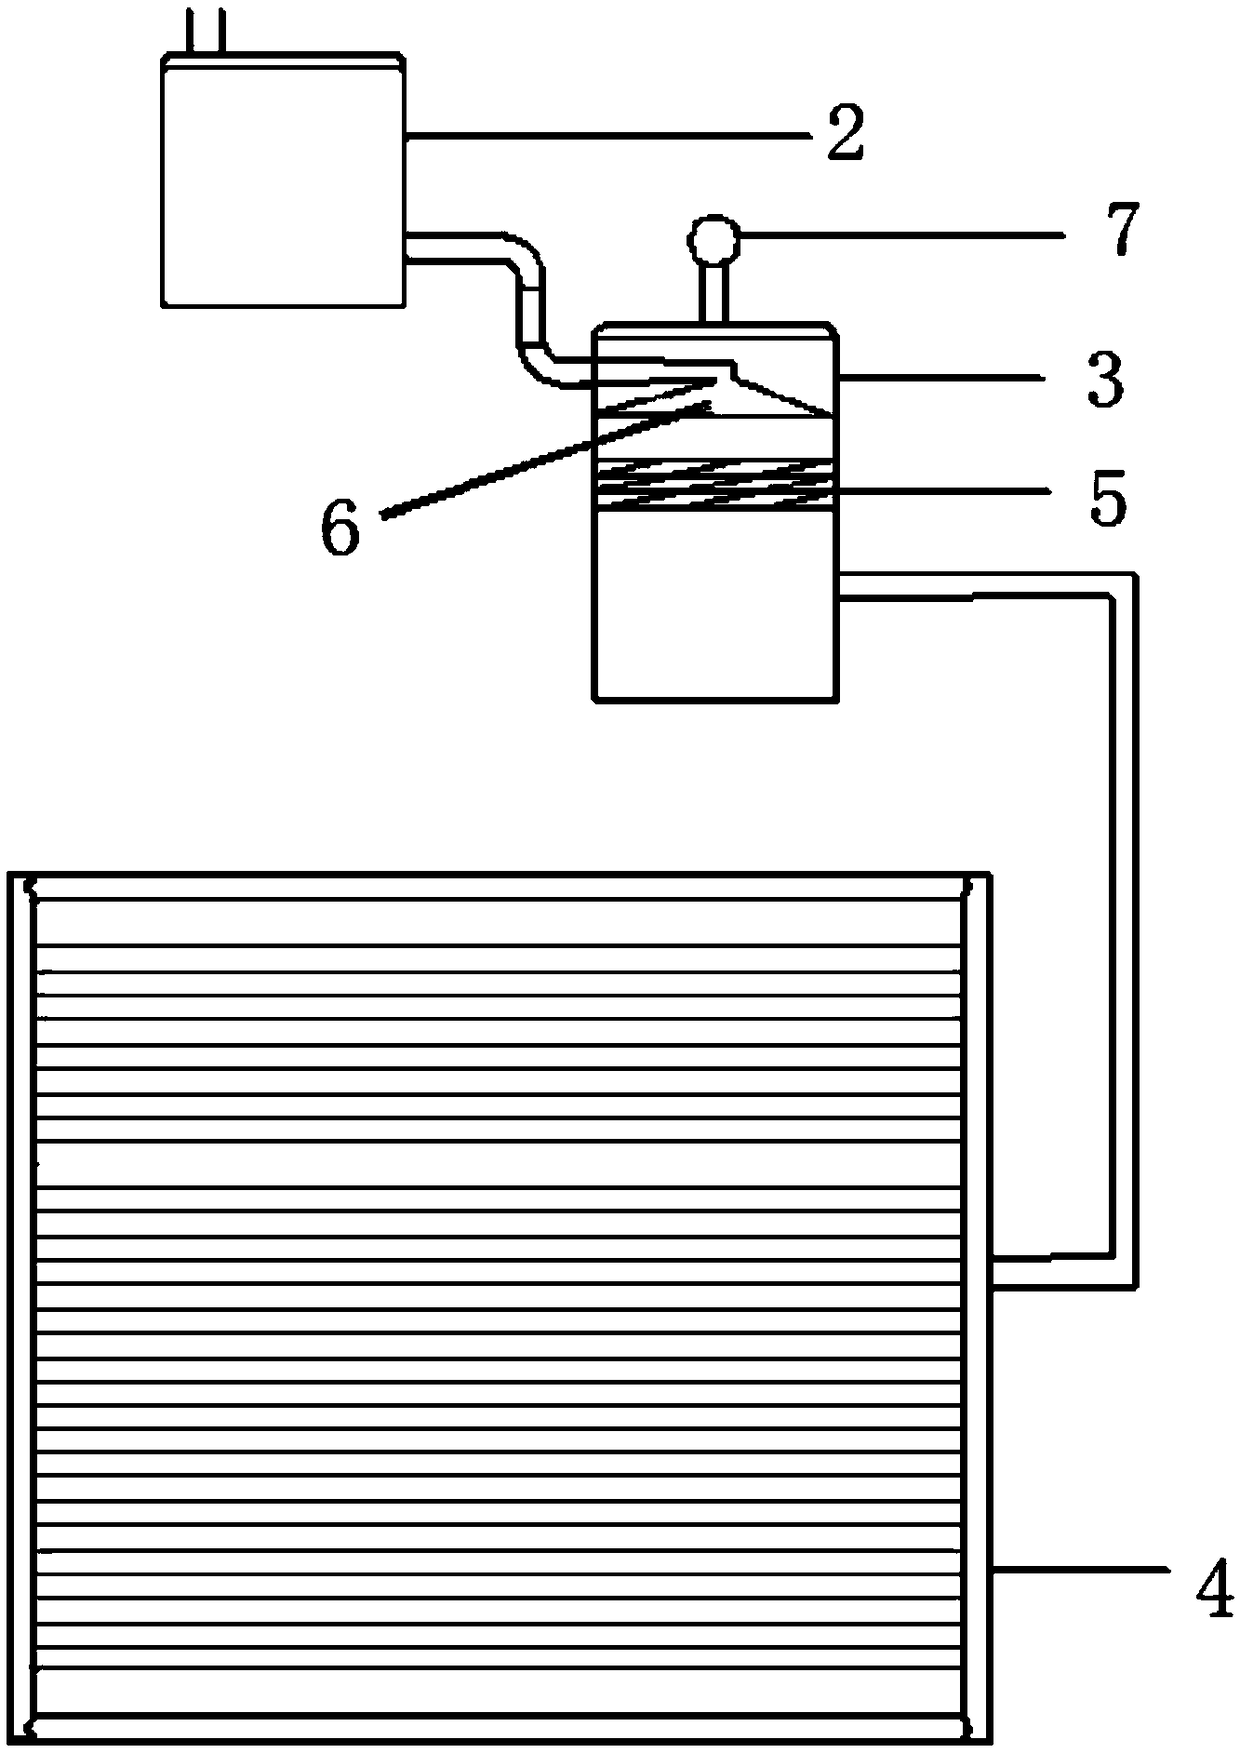 Self-moving aeration device for increasing content of dissolved oxygen in water